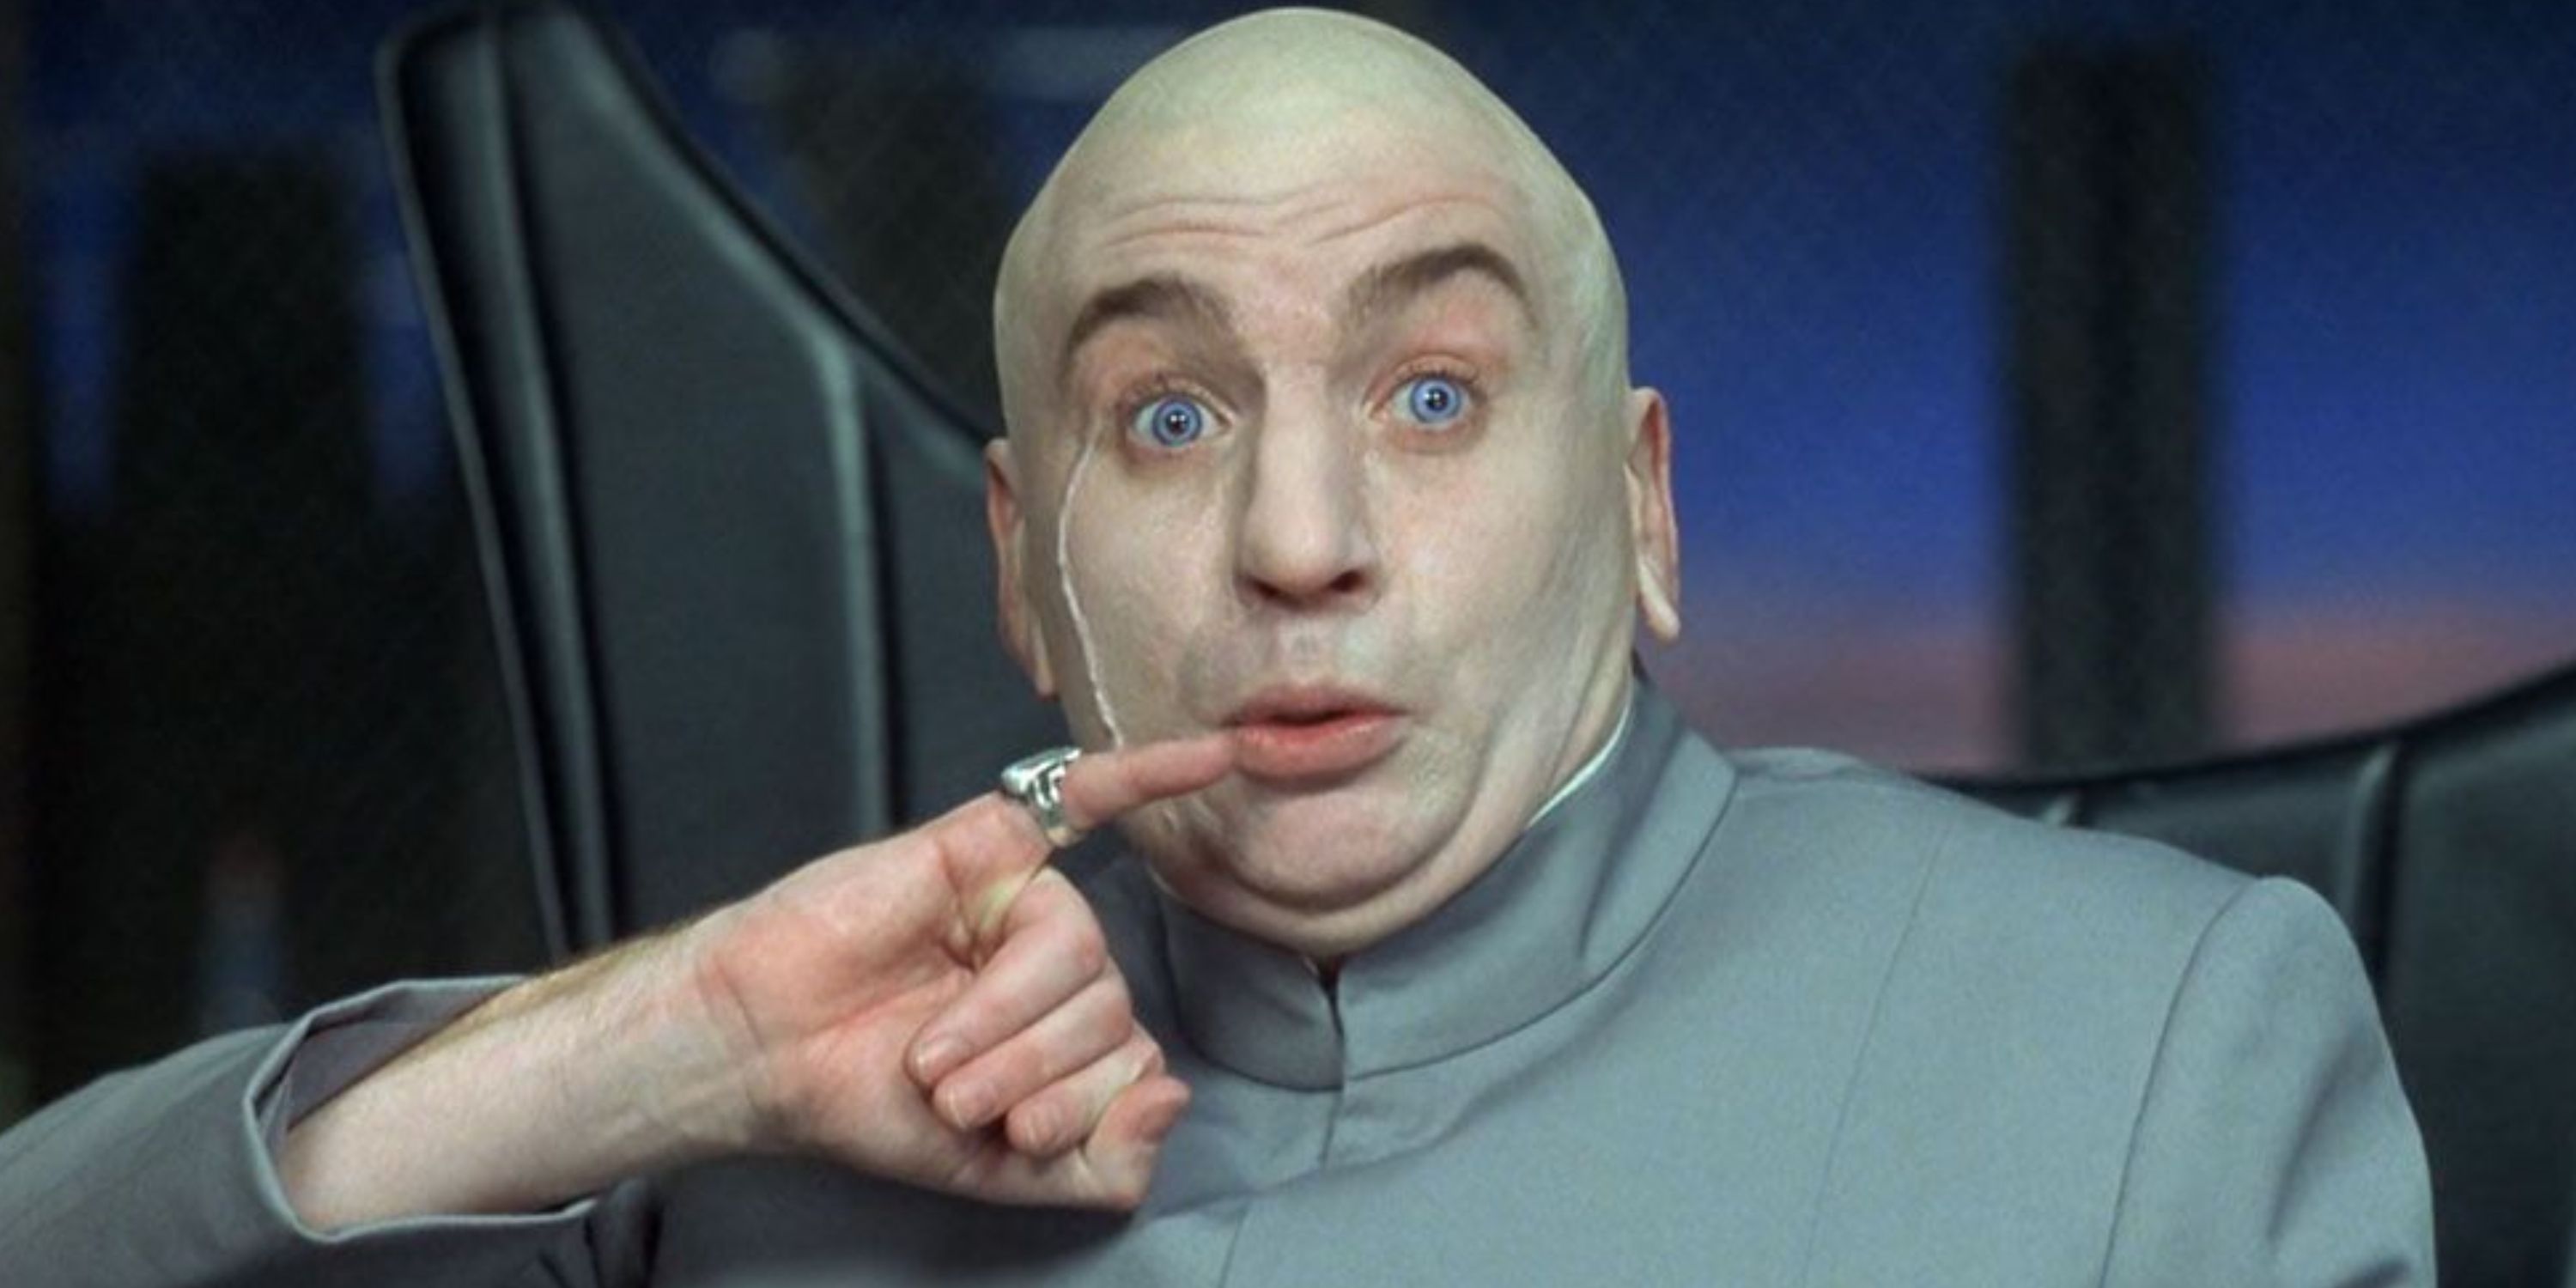 Dr. Evil wide-eyed, pinky on the side of his mouth, in a scene from Austin Powers.